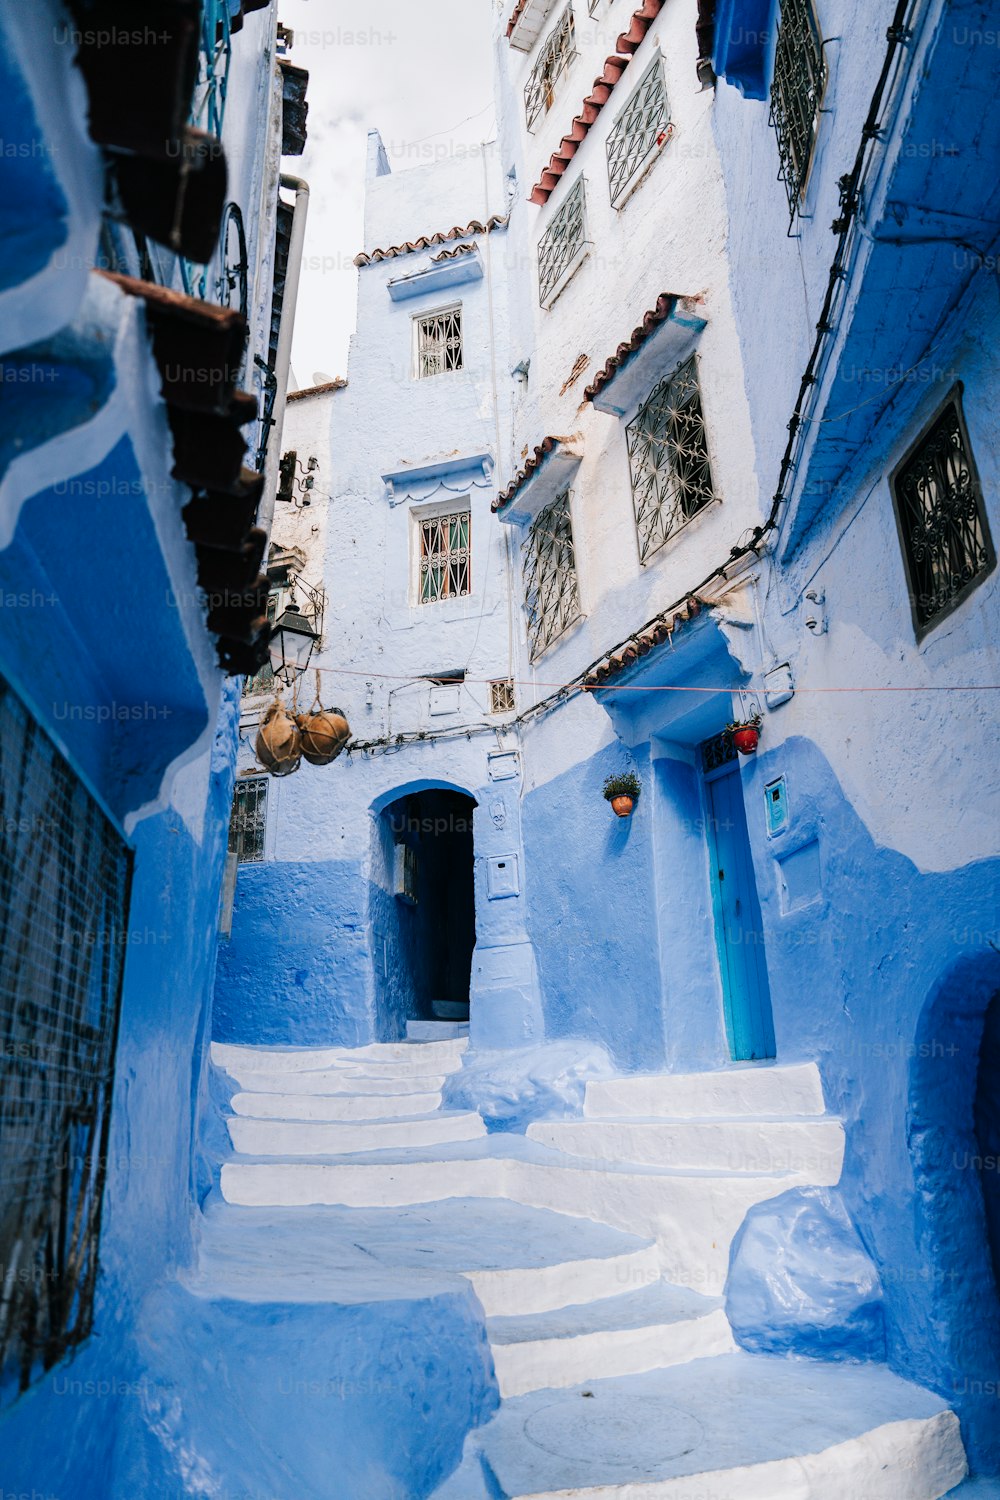 a narrow alleyway with blue buildings and steps